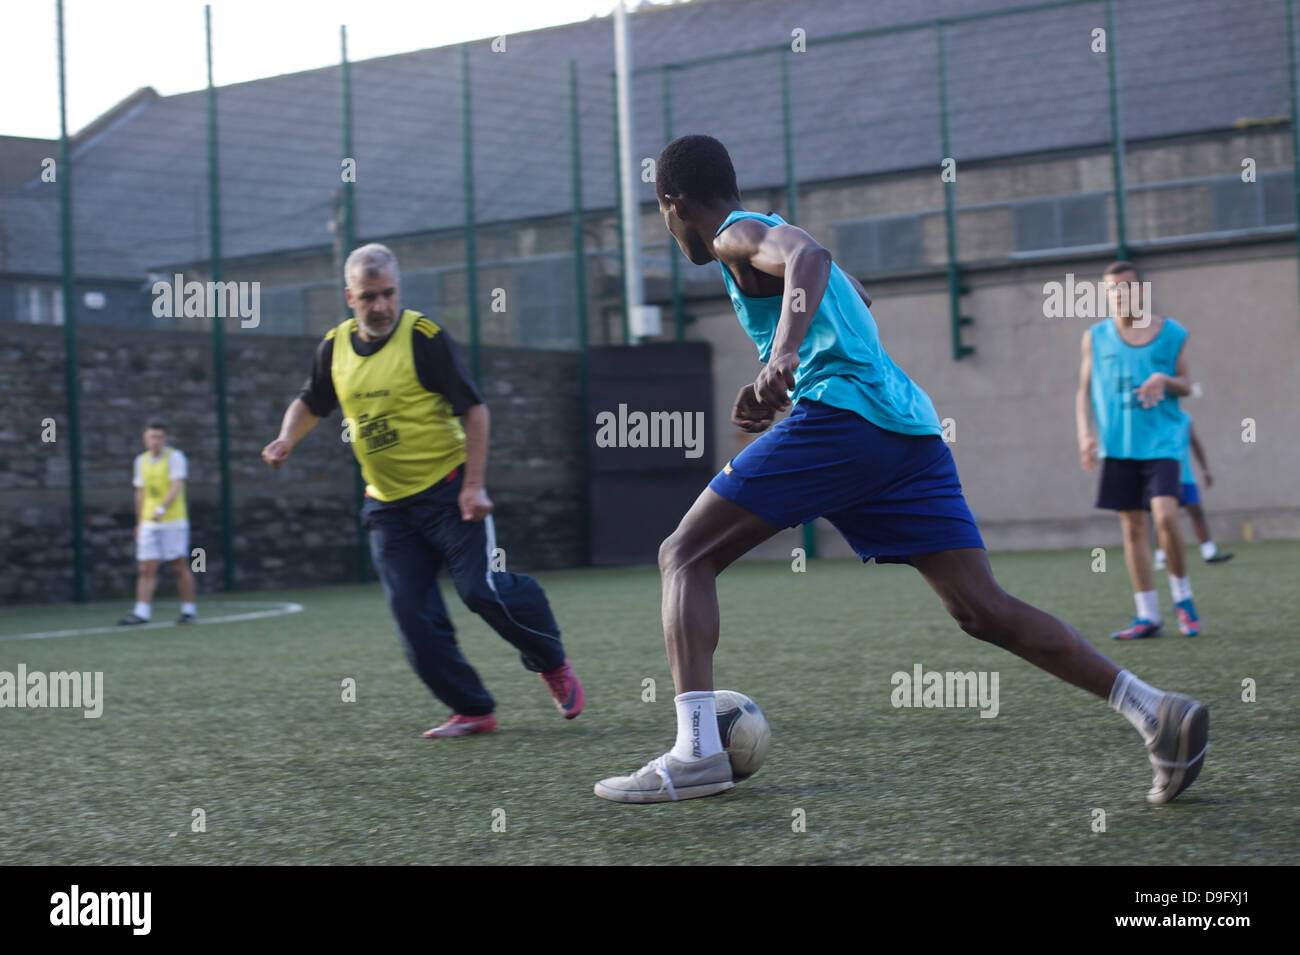 Young men playing football. Playing soccer. Stock Photo